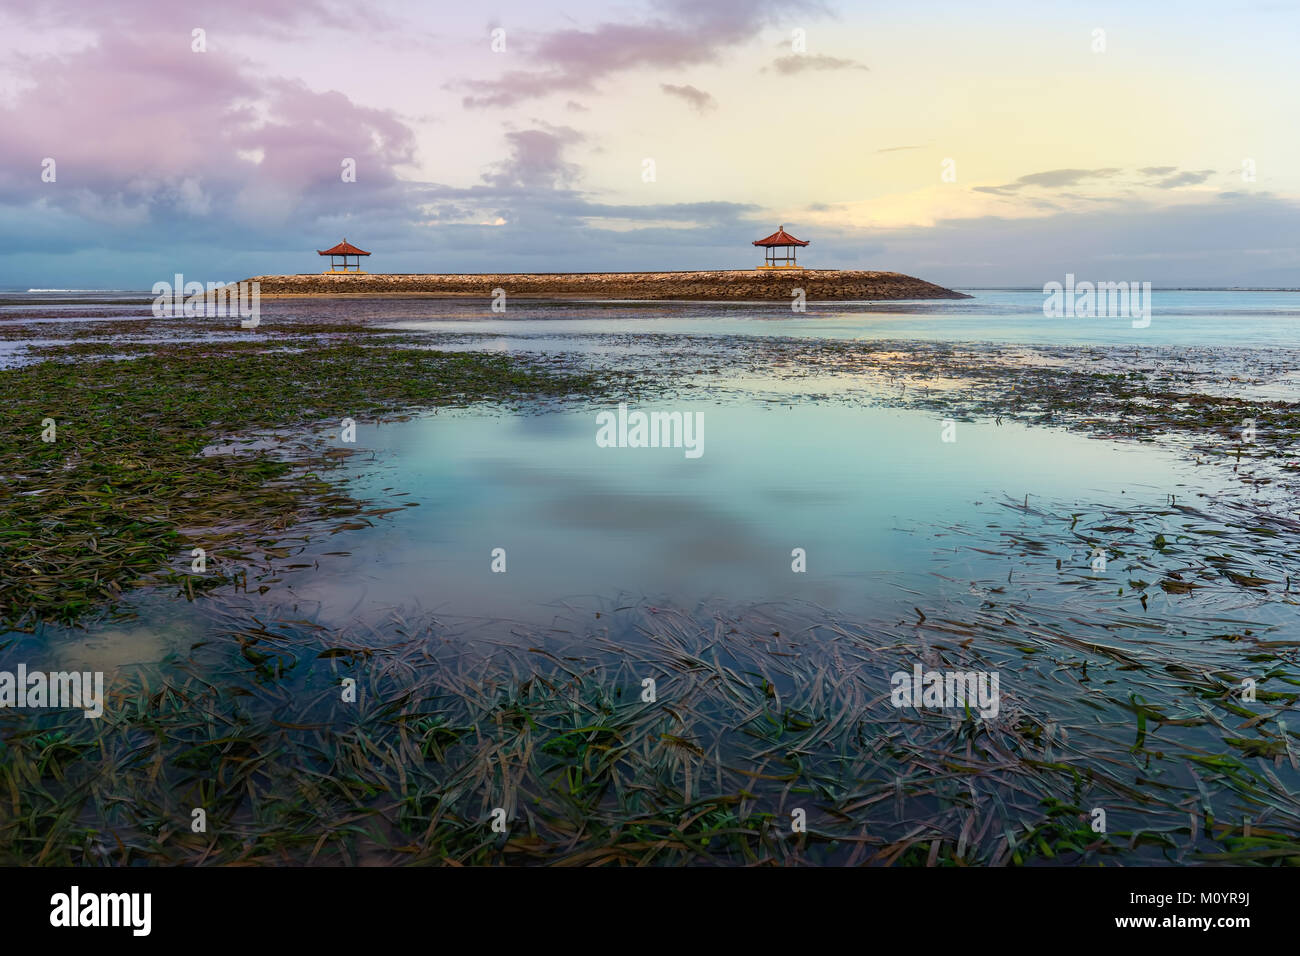 Gazebo in the middle on sea in low tide during sunset or sunrise Stock Photo